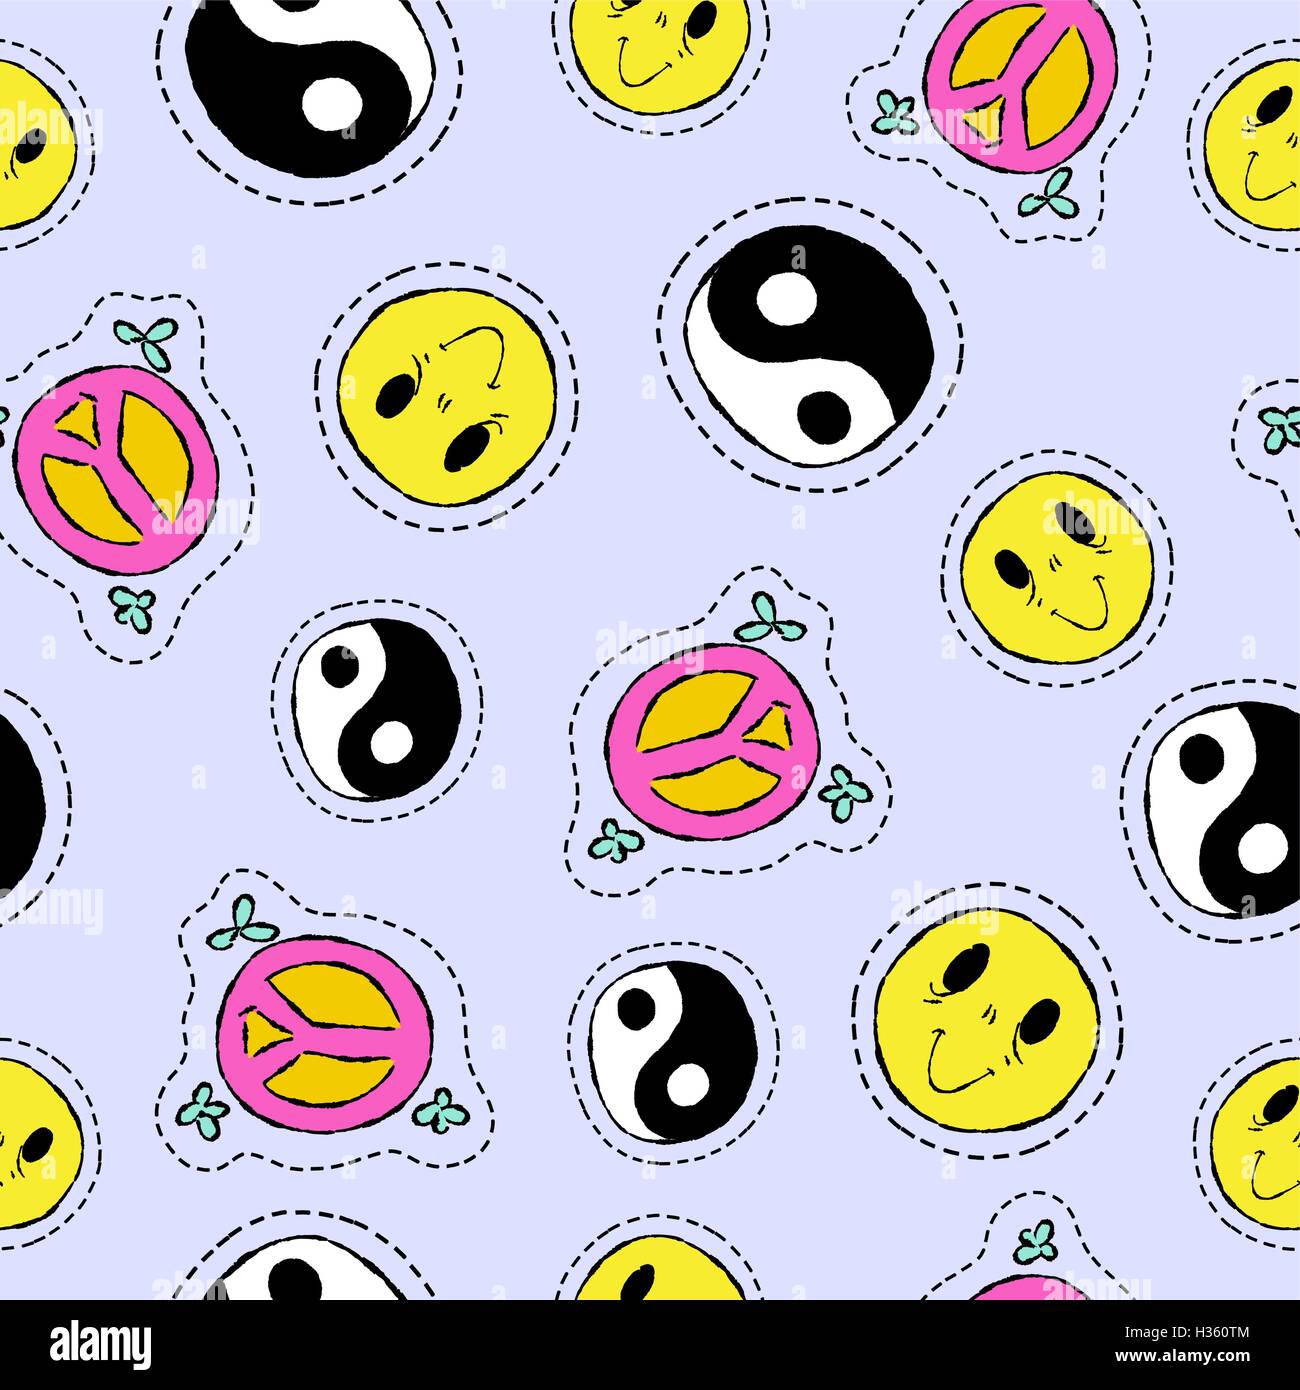 Hand drawn seamless pattern with retro 90s style patch icons. Smiley face, ying yang symbol and peace sign background. EPS10 vec Stock Vector